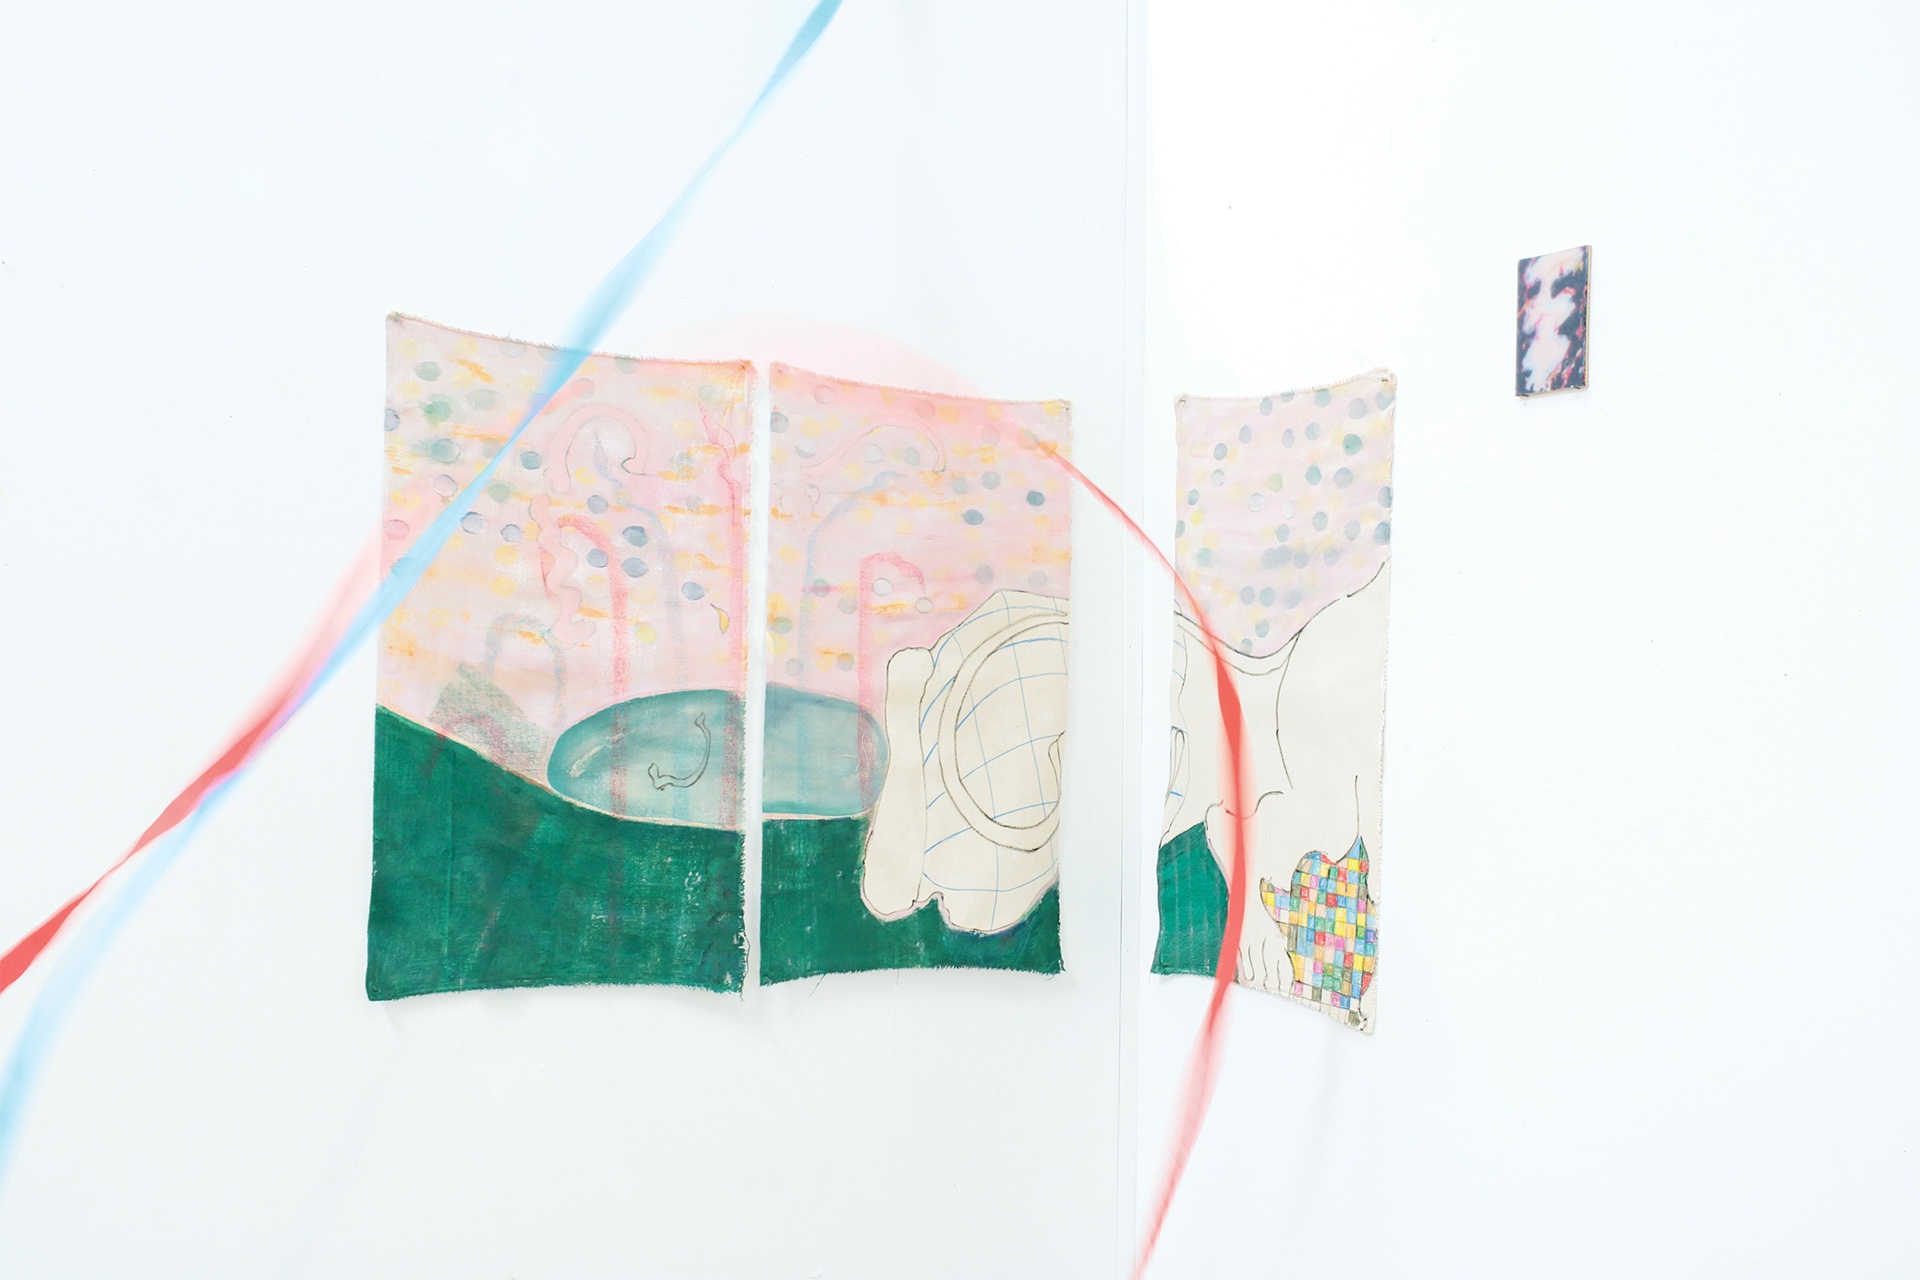 Three canvases in pink and green, hung round a corner. The canvases depict the rear end of a heraldic leopard. Blue and red streamers are also in shot.